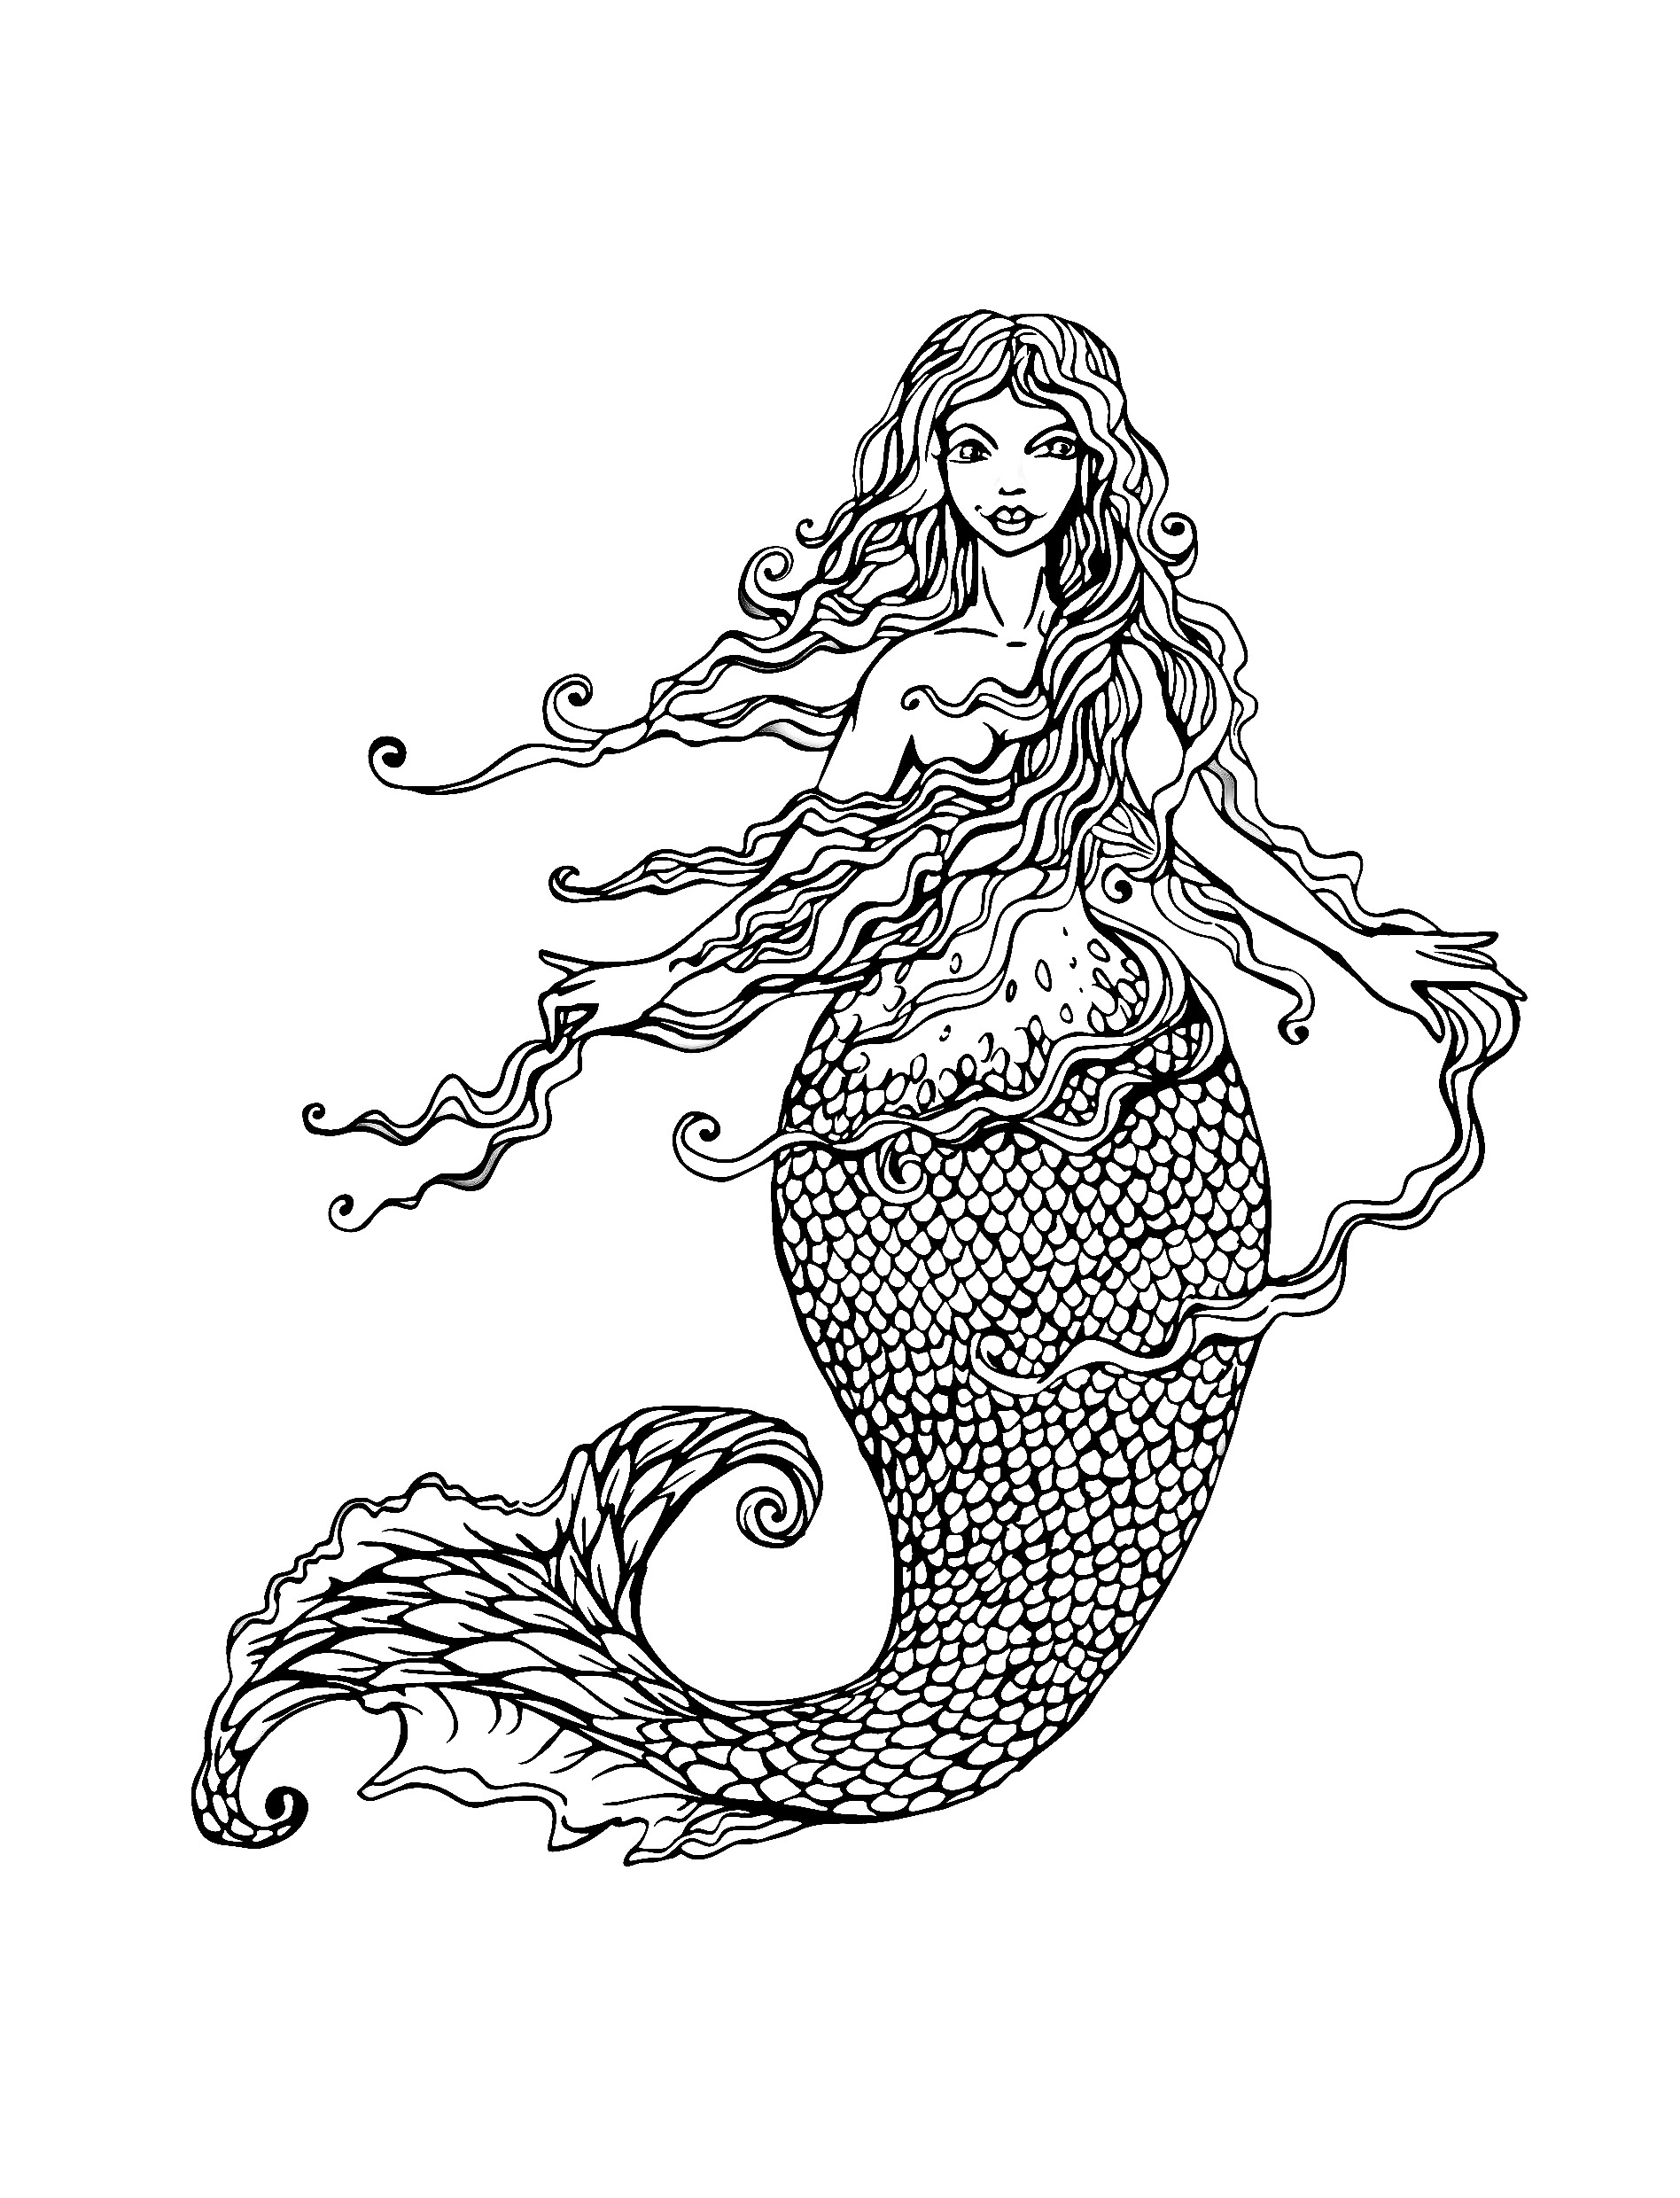 Get your pencils and markers ready to color this mermaid coloring page